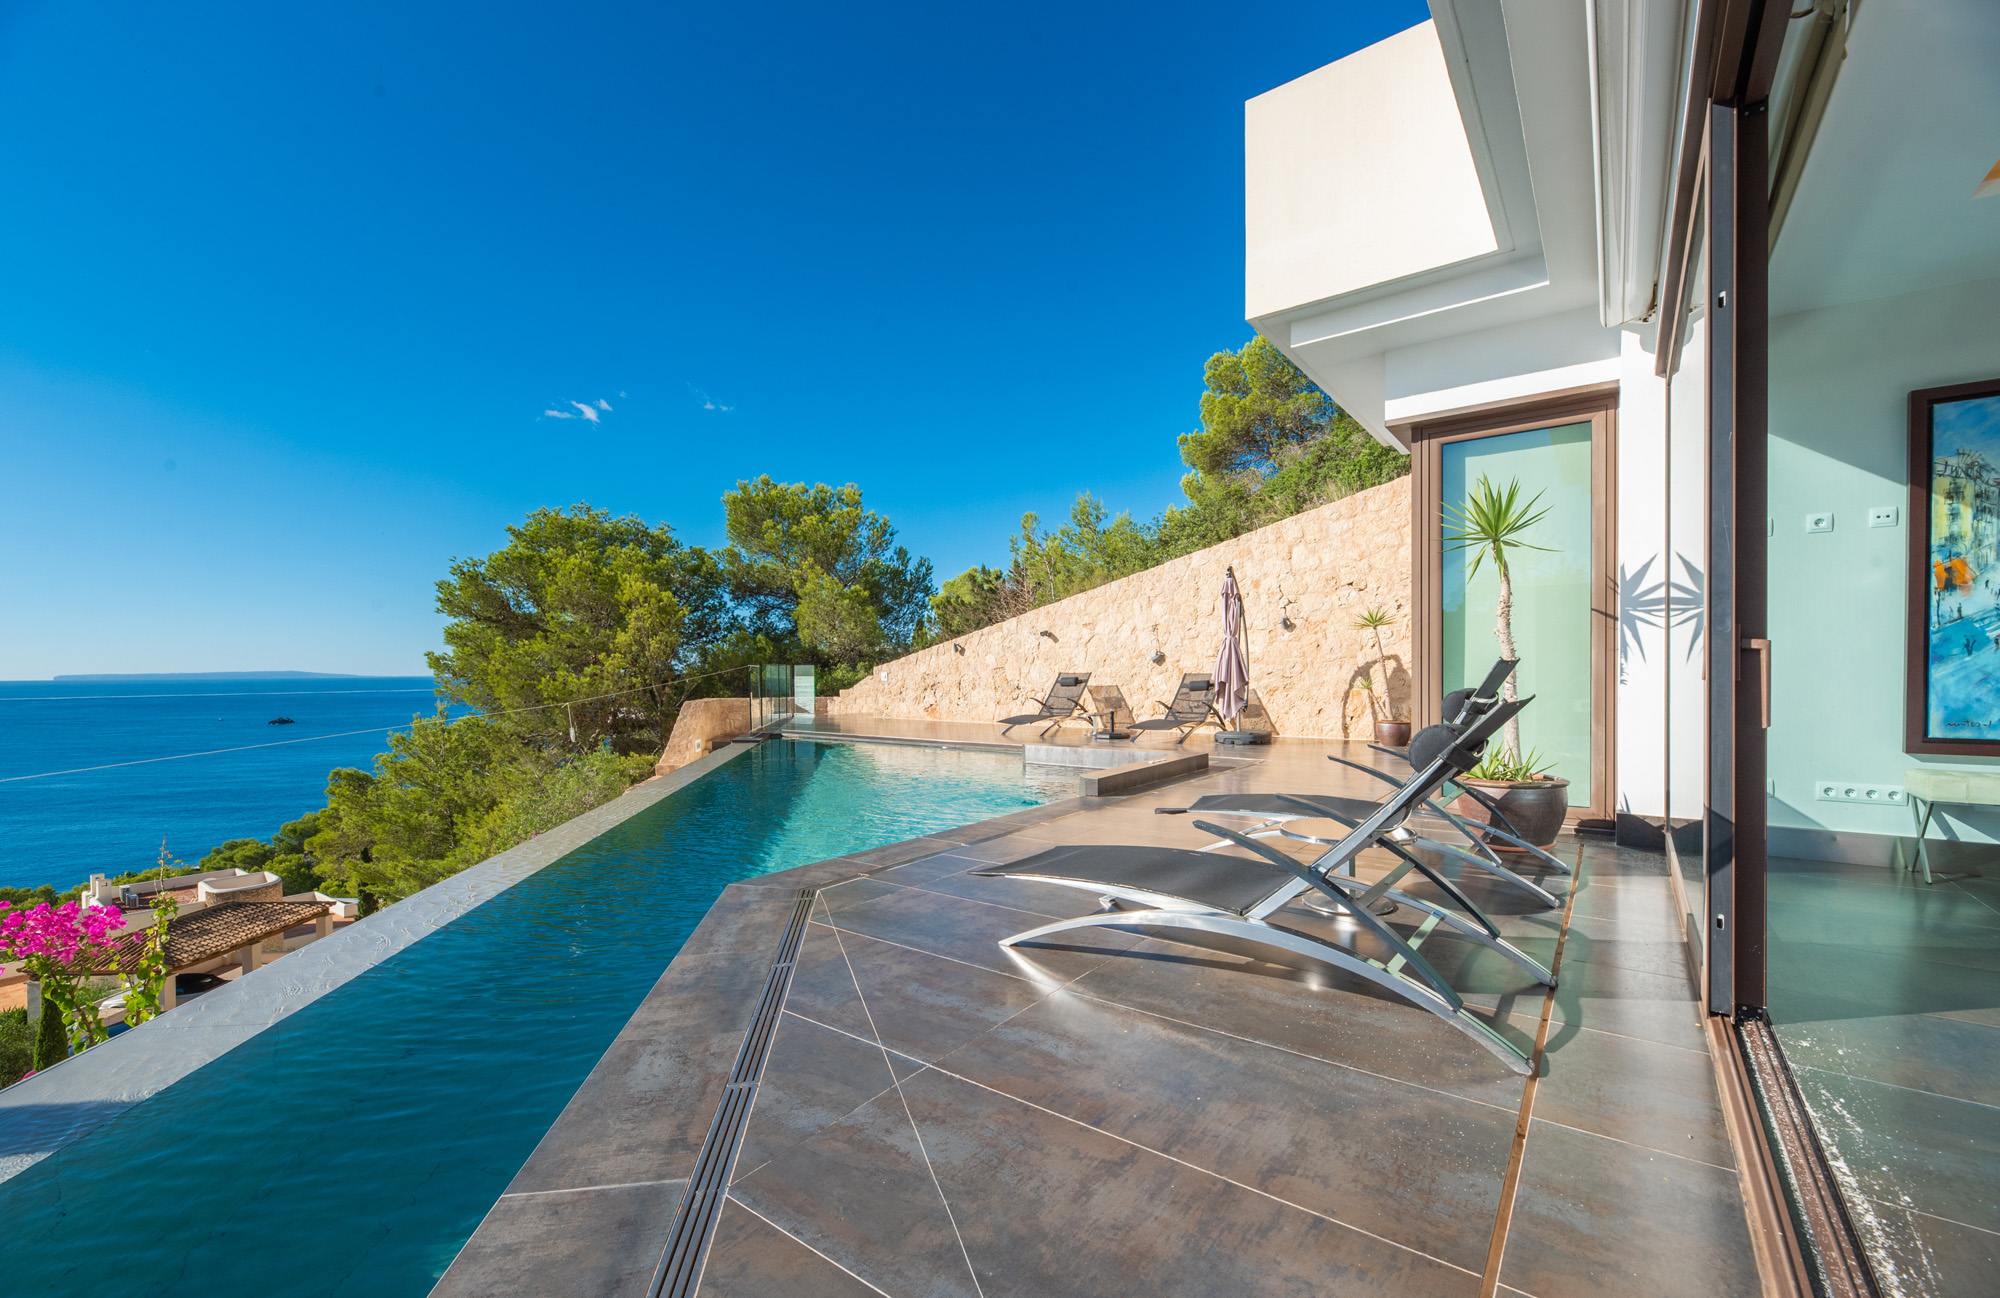 Pool and lounge area of a luxury villa in Ibiza